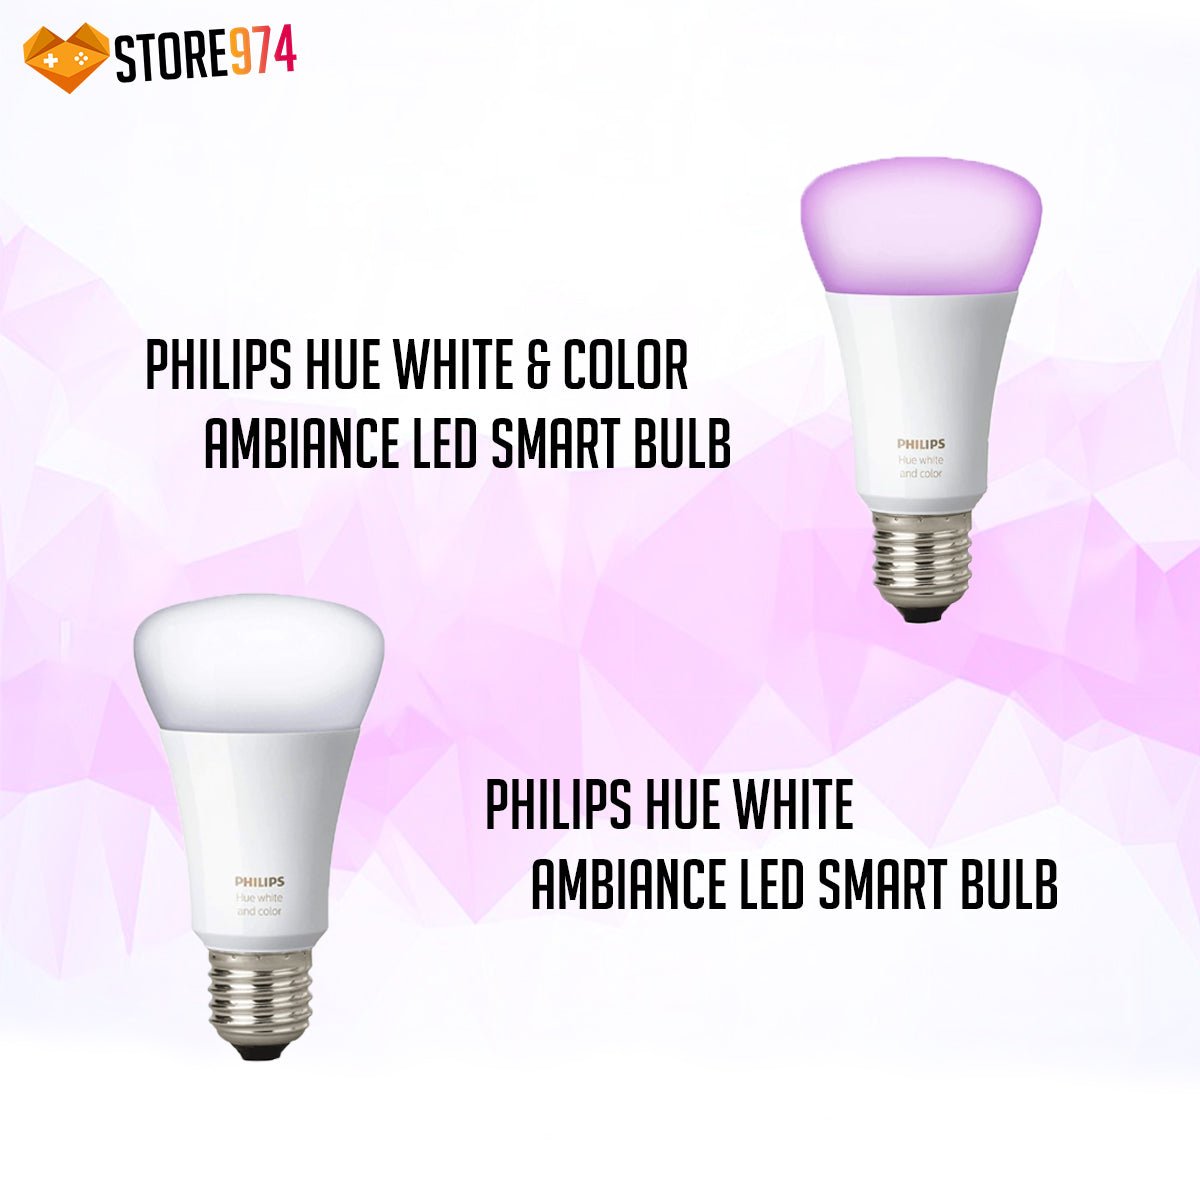 Philips HUE White & Color Ambiance LED Smart Bulb + White Ambiance LED Smart Bulb - Store 974 | ستور ٩٧٤